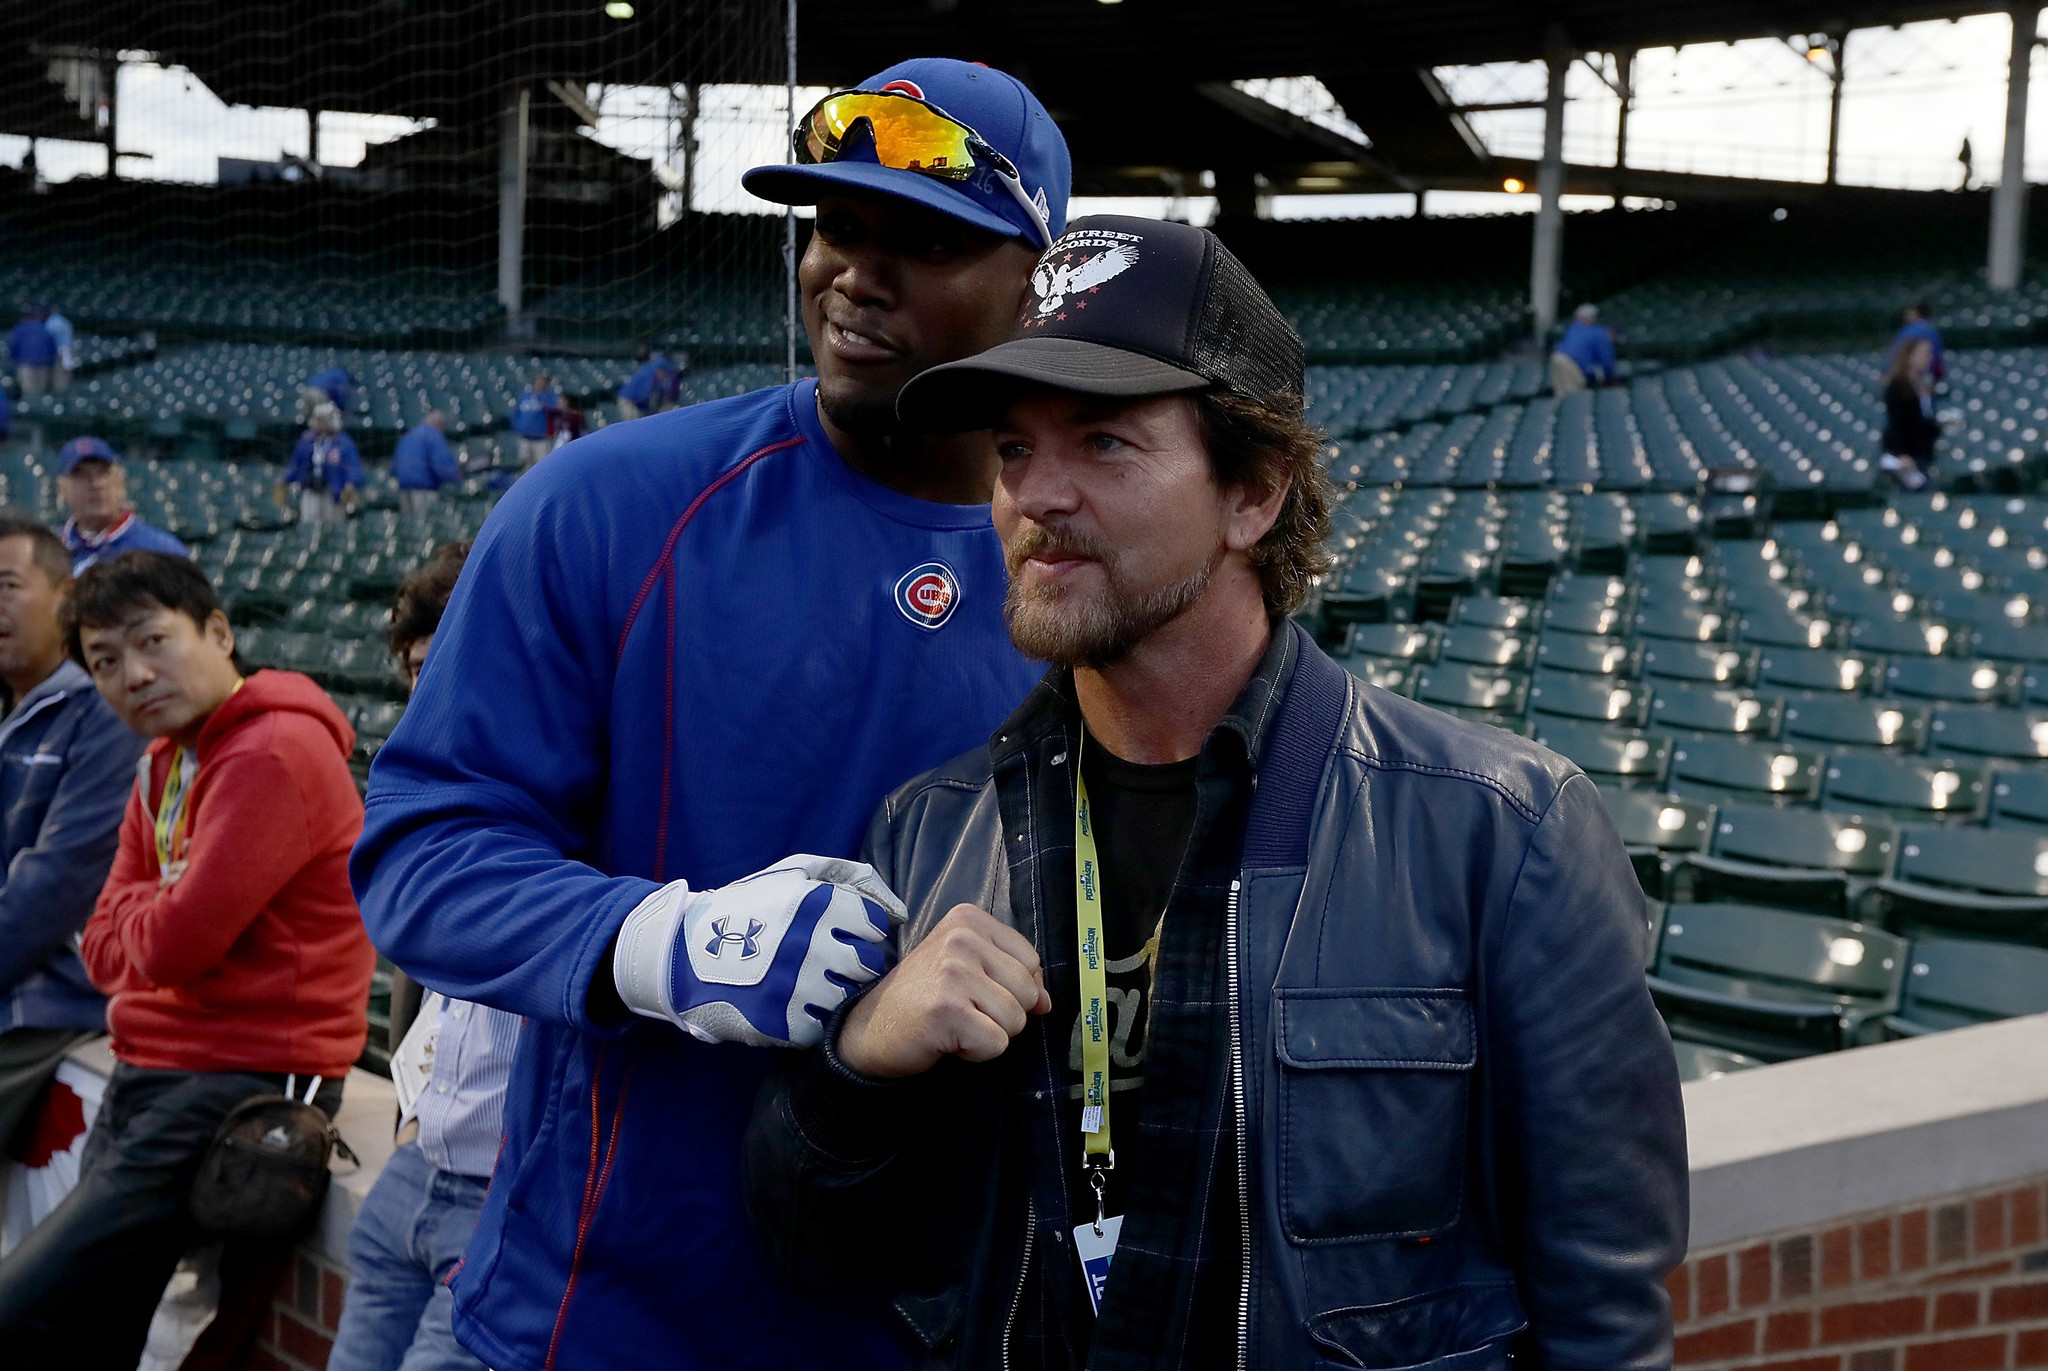 Pearl Jam's Eddie Vedder all-in on Cubs going 'All the Way' - Chicago Tribune2048 x 1371